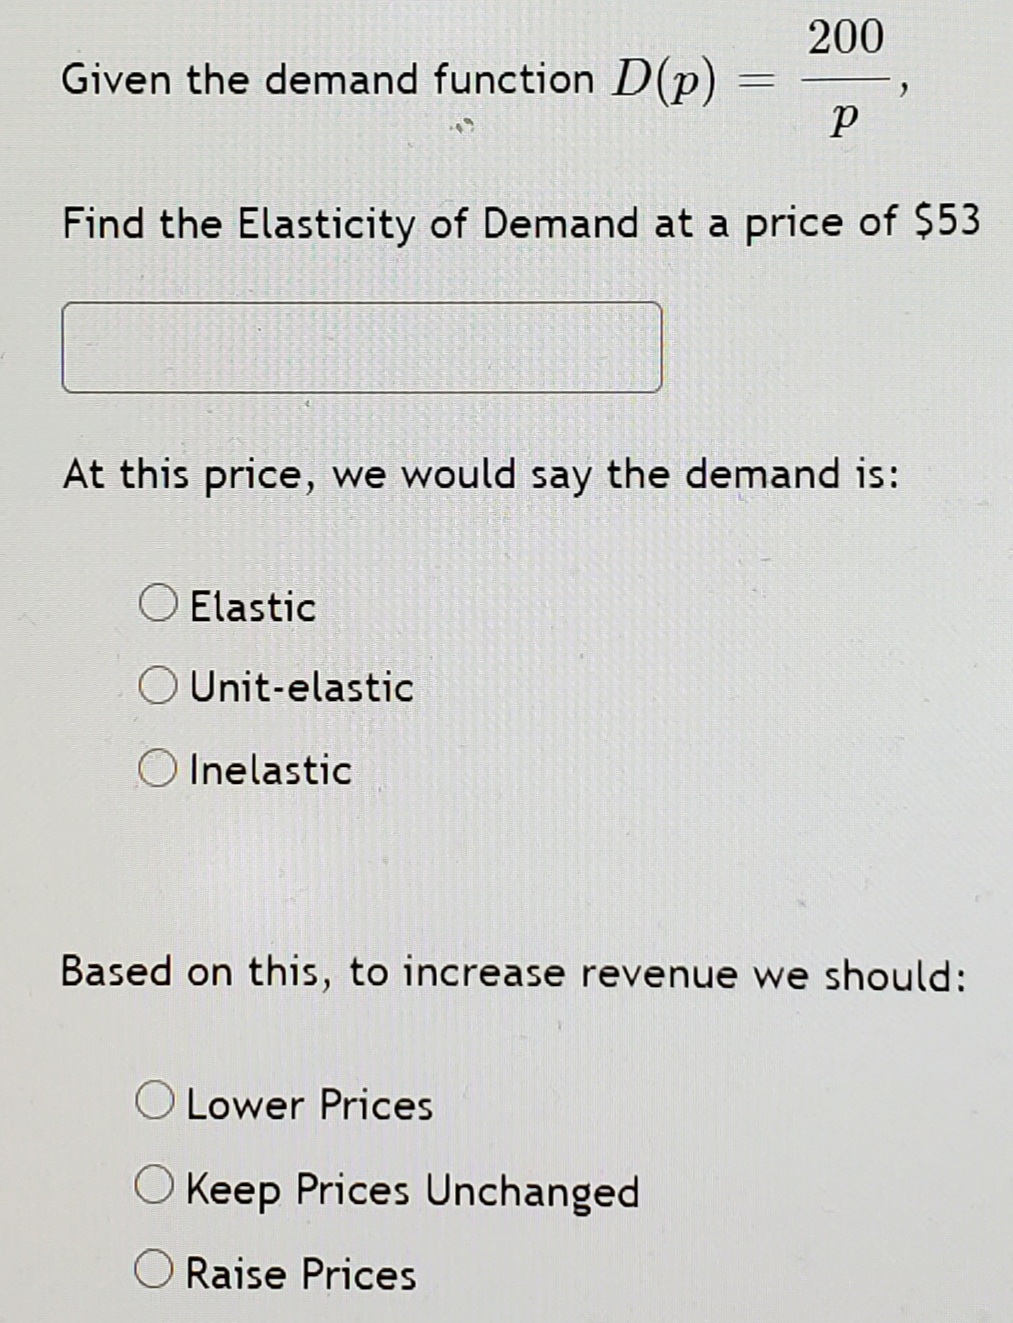 200
Given the demand function D(p)
Find the Elasticity of Demand at a price of $53
At this price, we would say the demand is:
O Elastic
O Unit-elastic
O Inelastic
Based on this, to increase revenue we should:
O Lower Prices
O Keep Prices Unchanged
O Raise Prices
